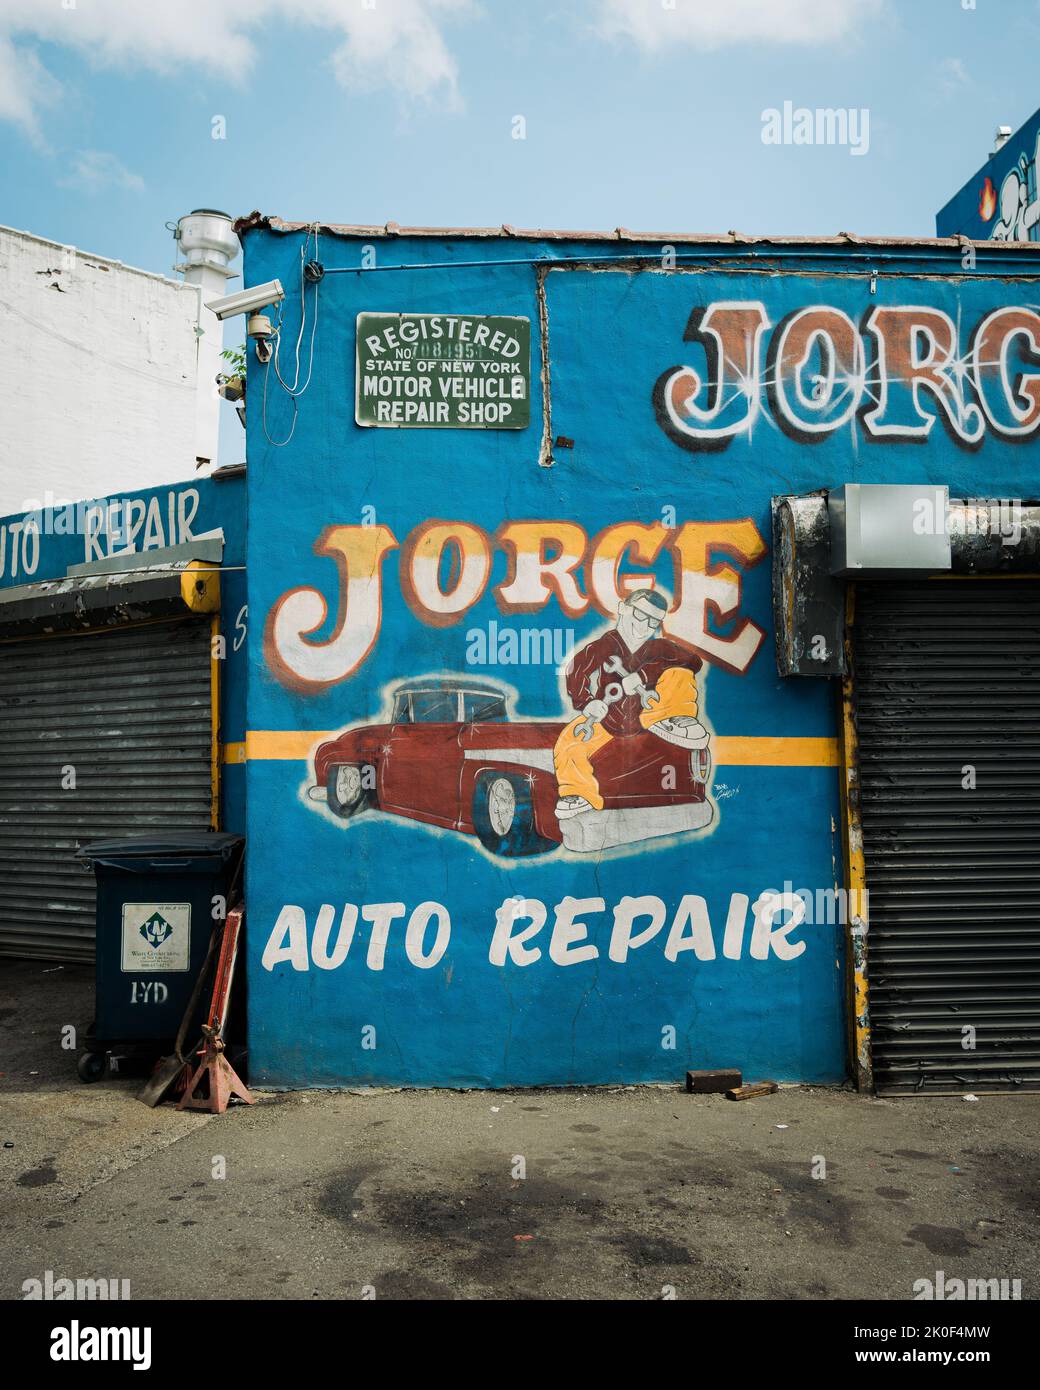 Jorge Auto Repair hand-painted vintage sign, Brooklyn, New York Stock Photo